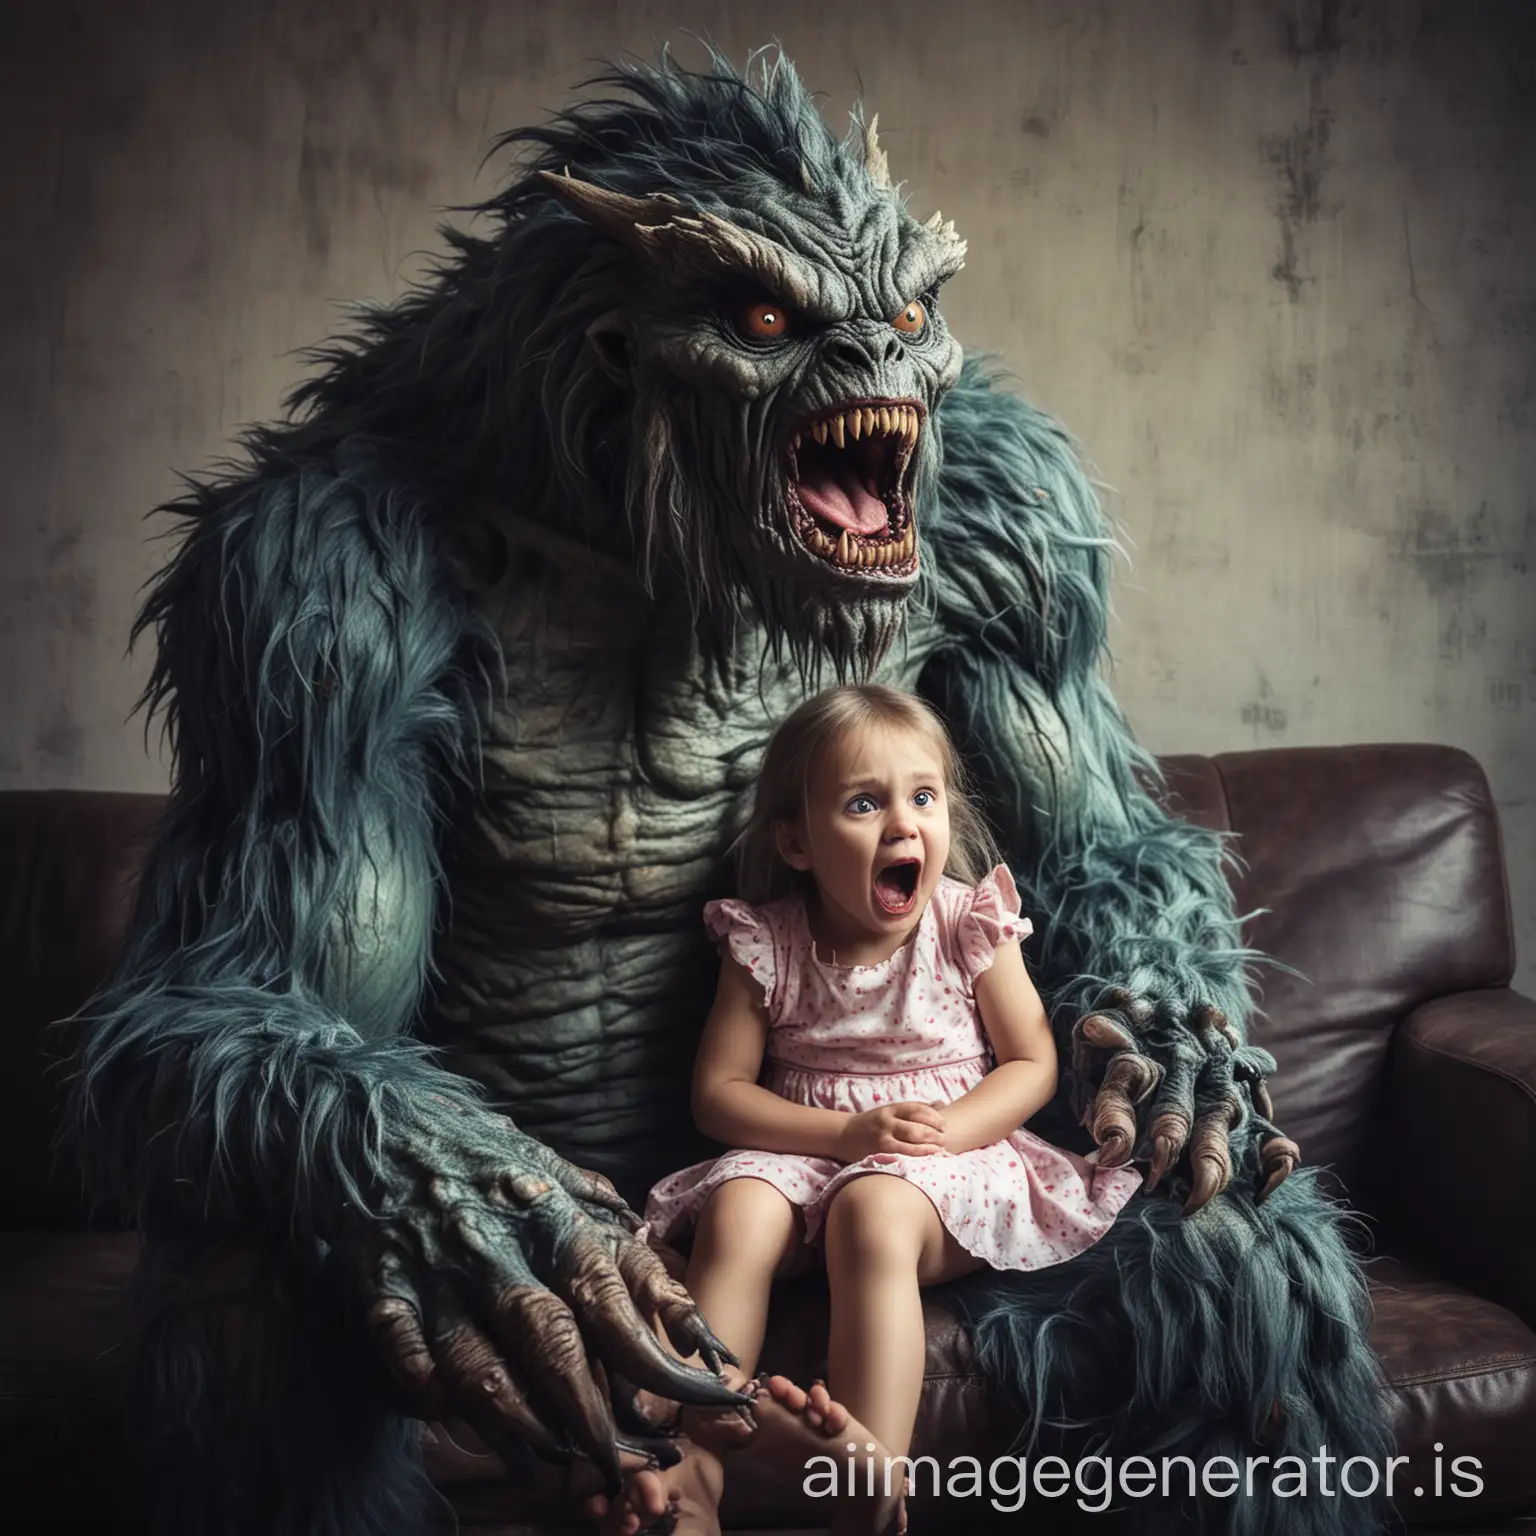 giant monster keeping a little girl on his lap and biting and trying to eat little girl. girl is full of fear